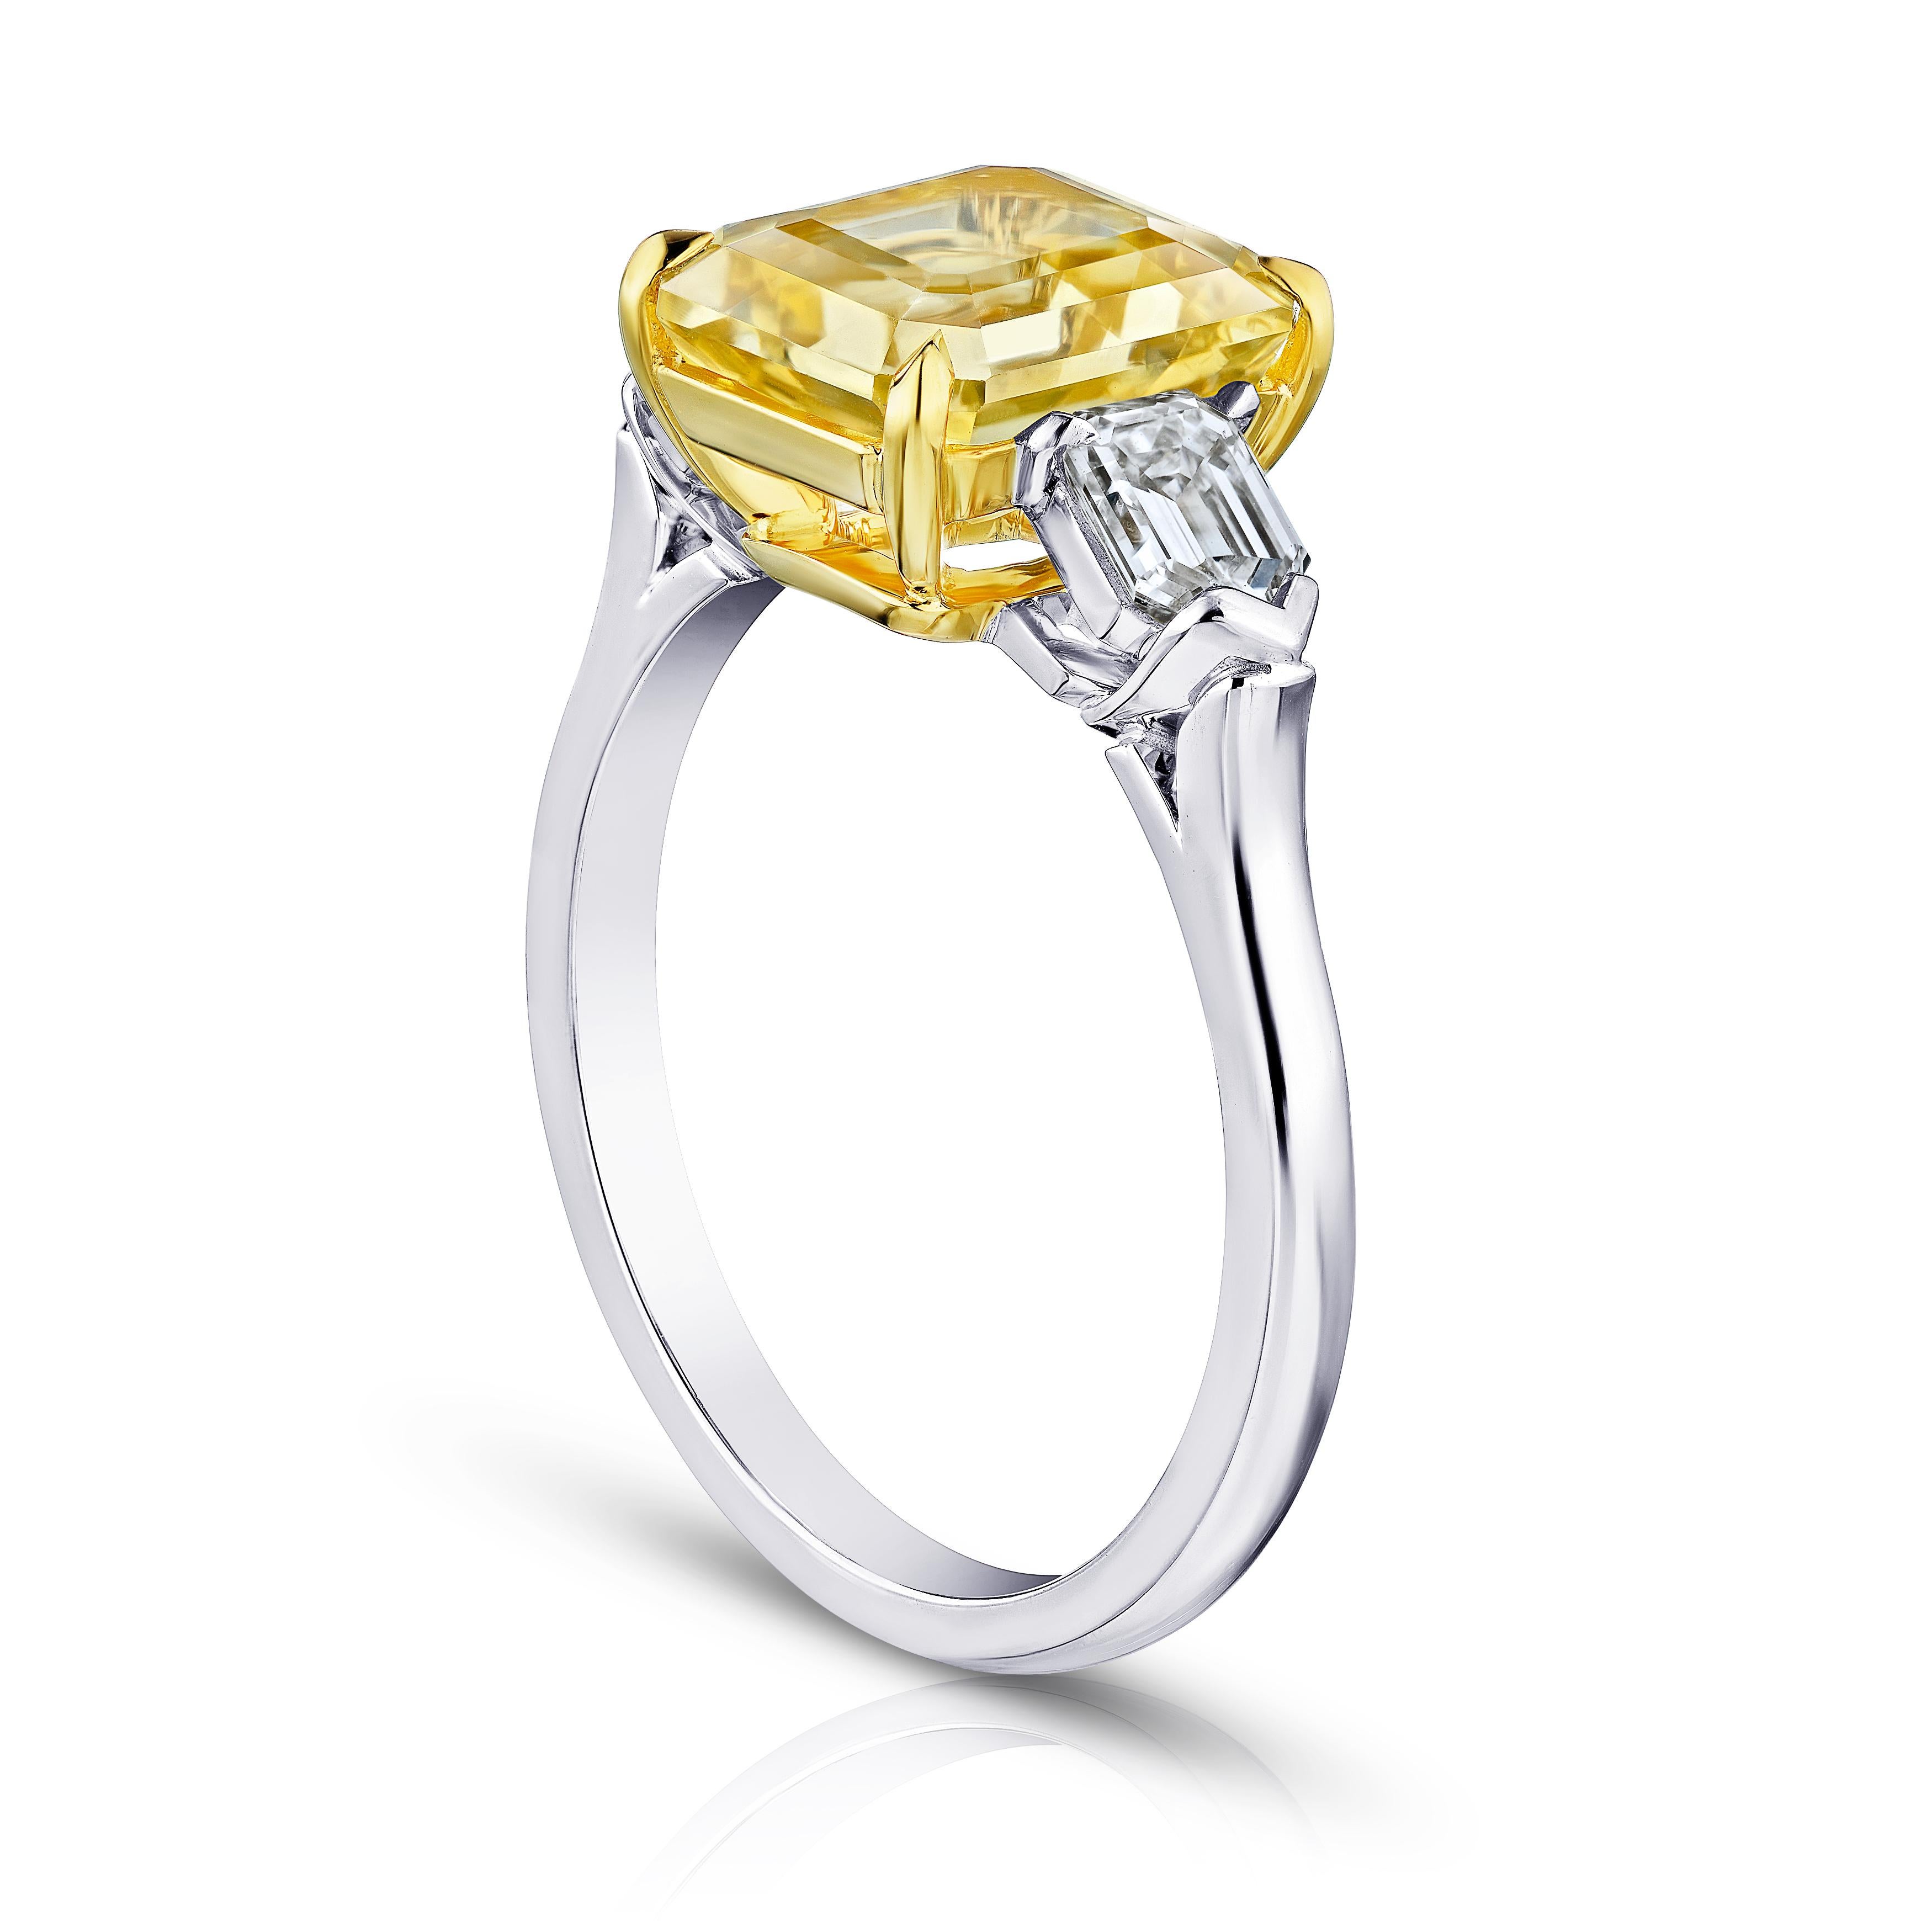 3.80 carat emerald cut yellow sapphire (no heat) with bullet shape diamonds .74 carats set in a platinum and 18k yellow gold ring.